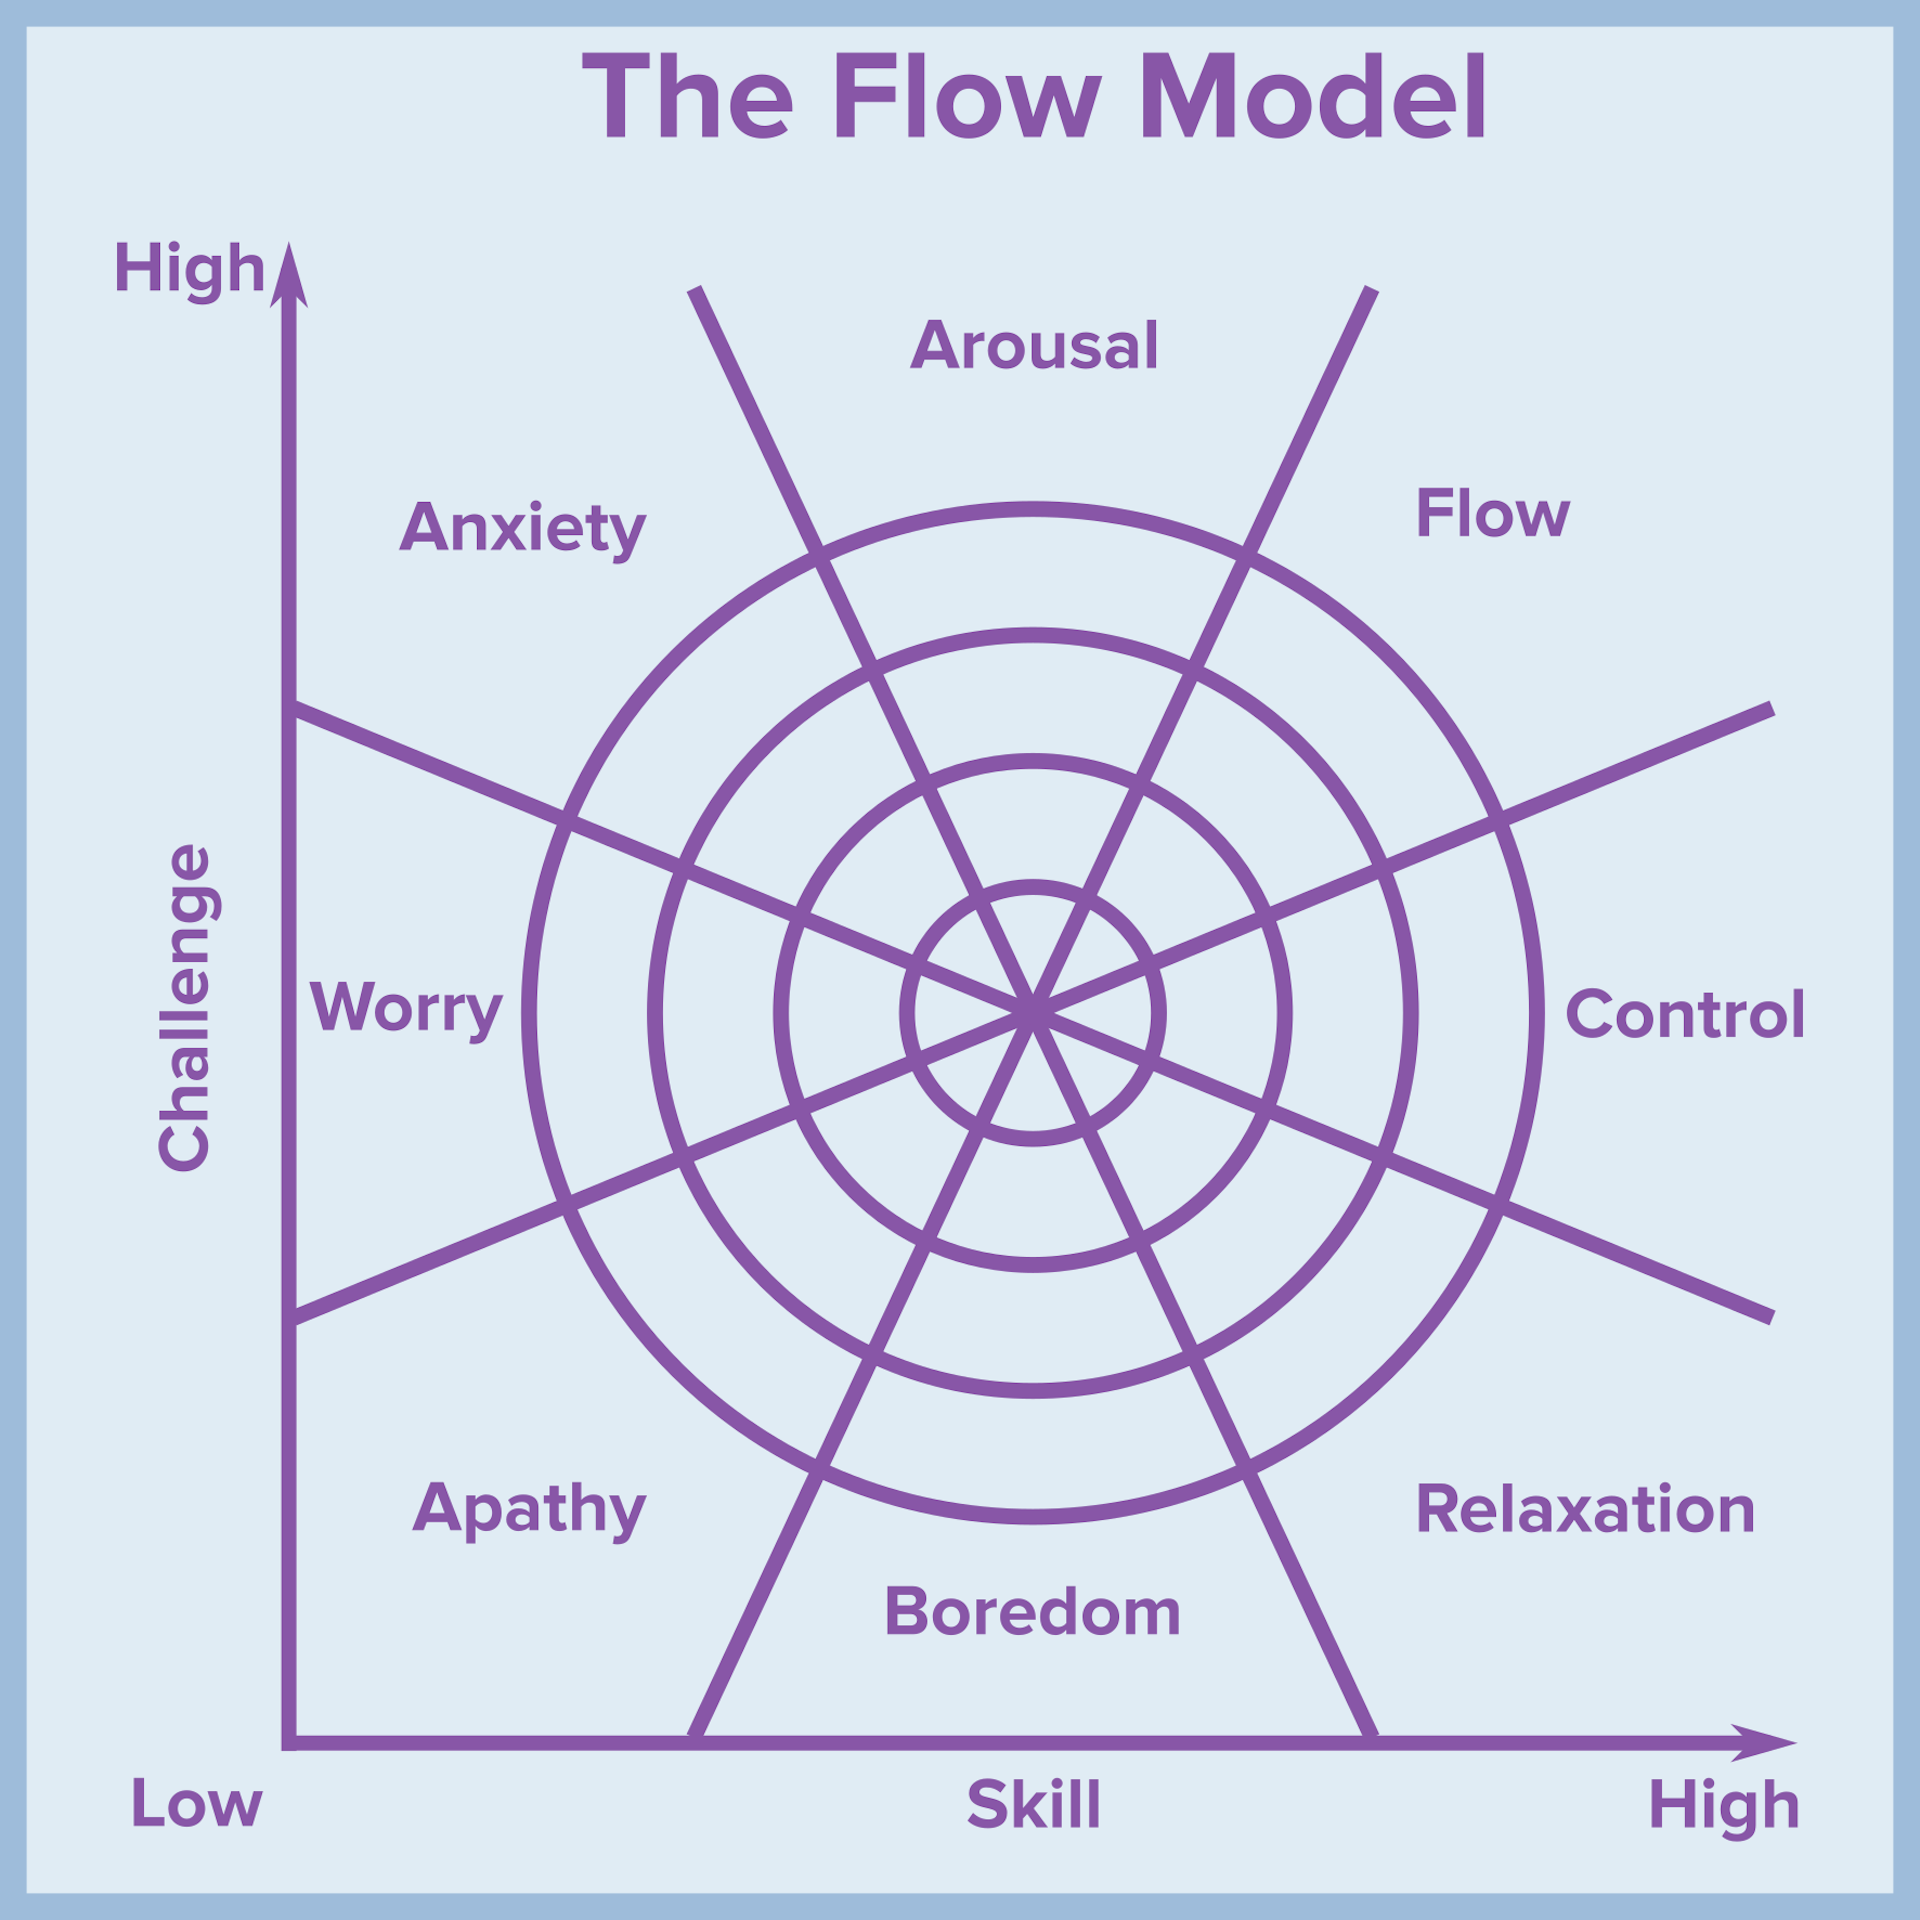 Line and circle diagram of the relationship between difficulty of a challenge, skill level, and the experience of flow.